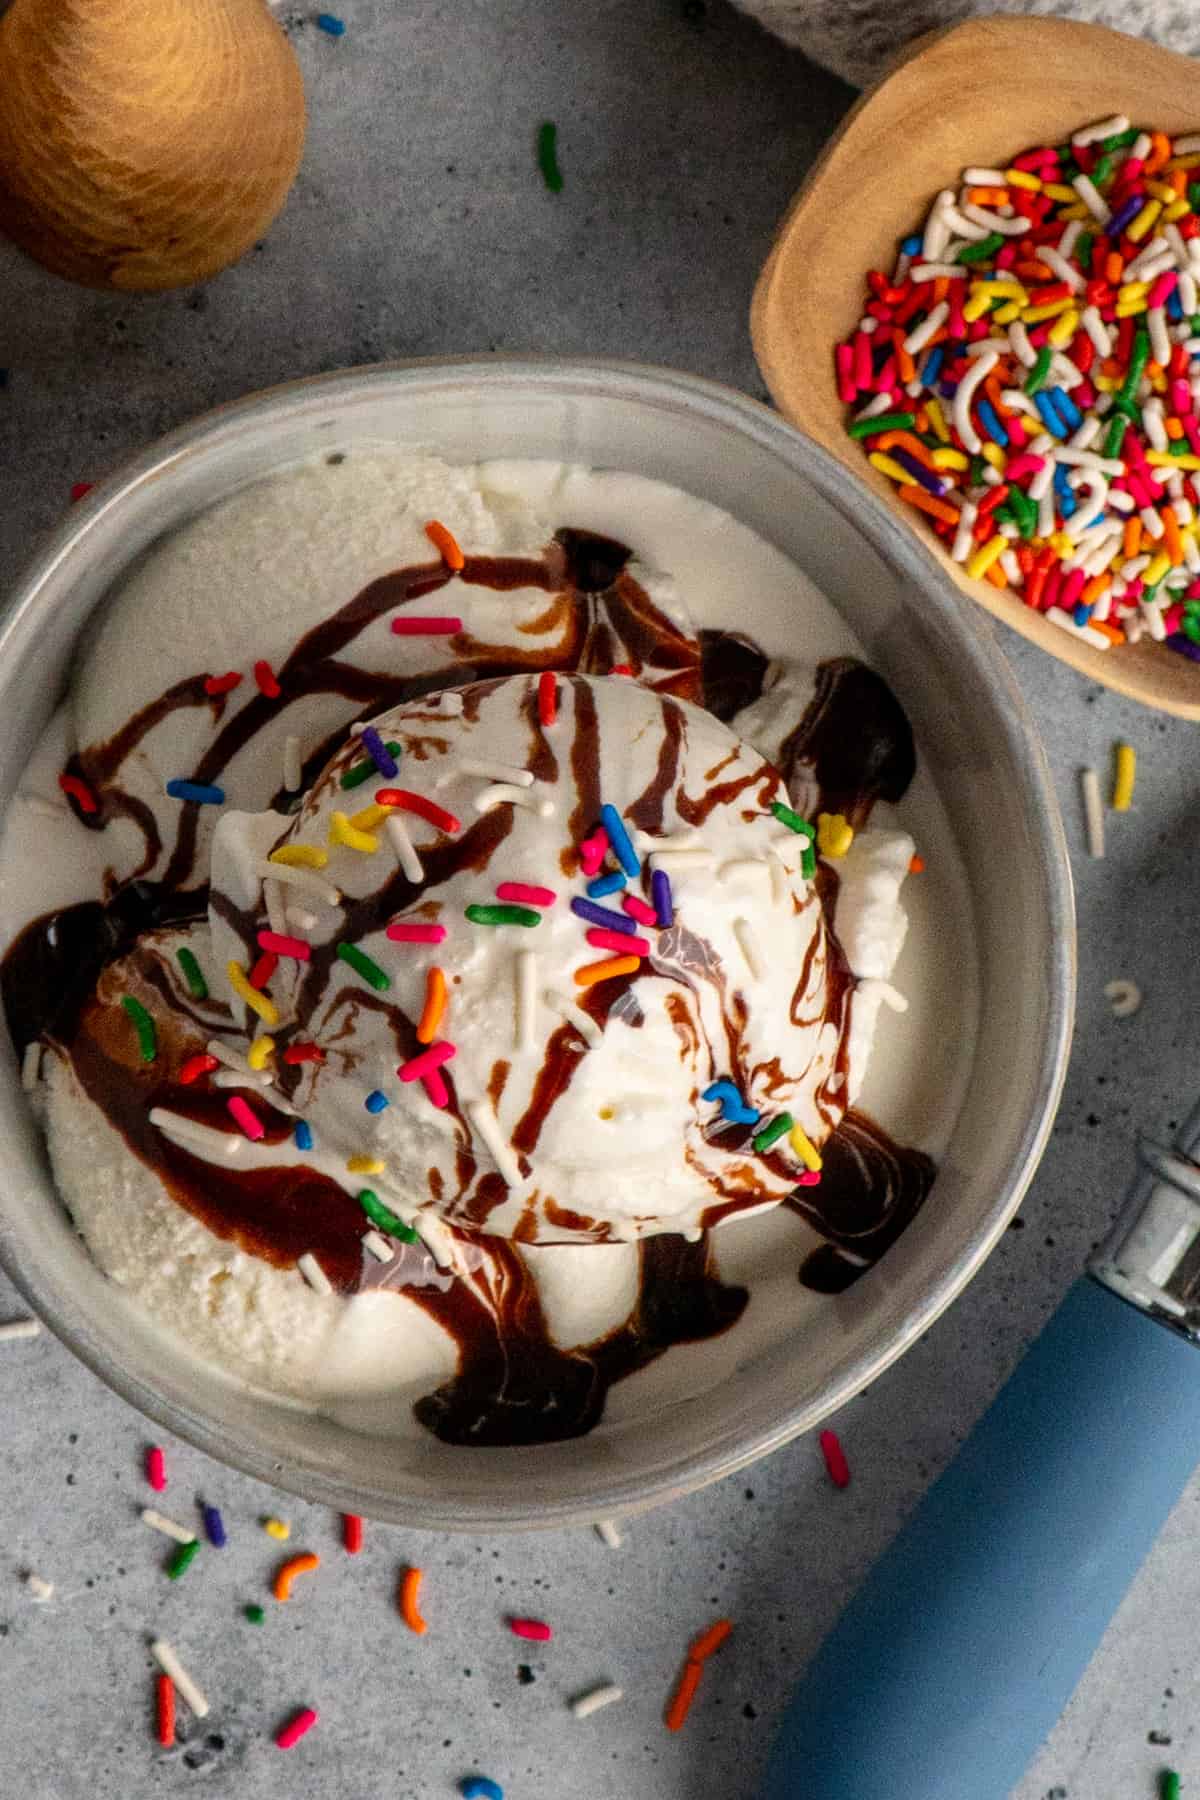 Overhead look at vanilla ice cream with chocolate sauce and sprinkles on top.